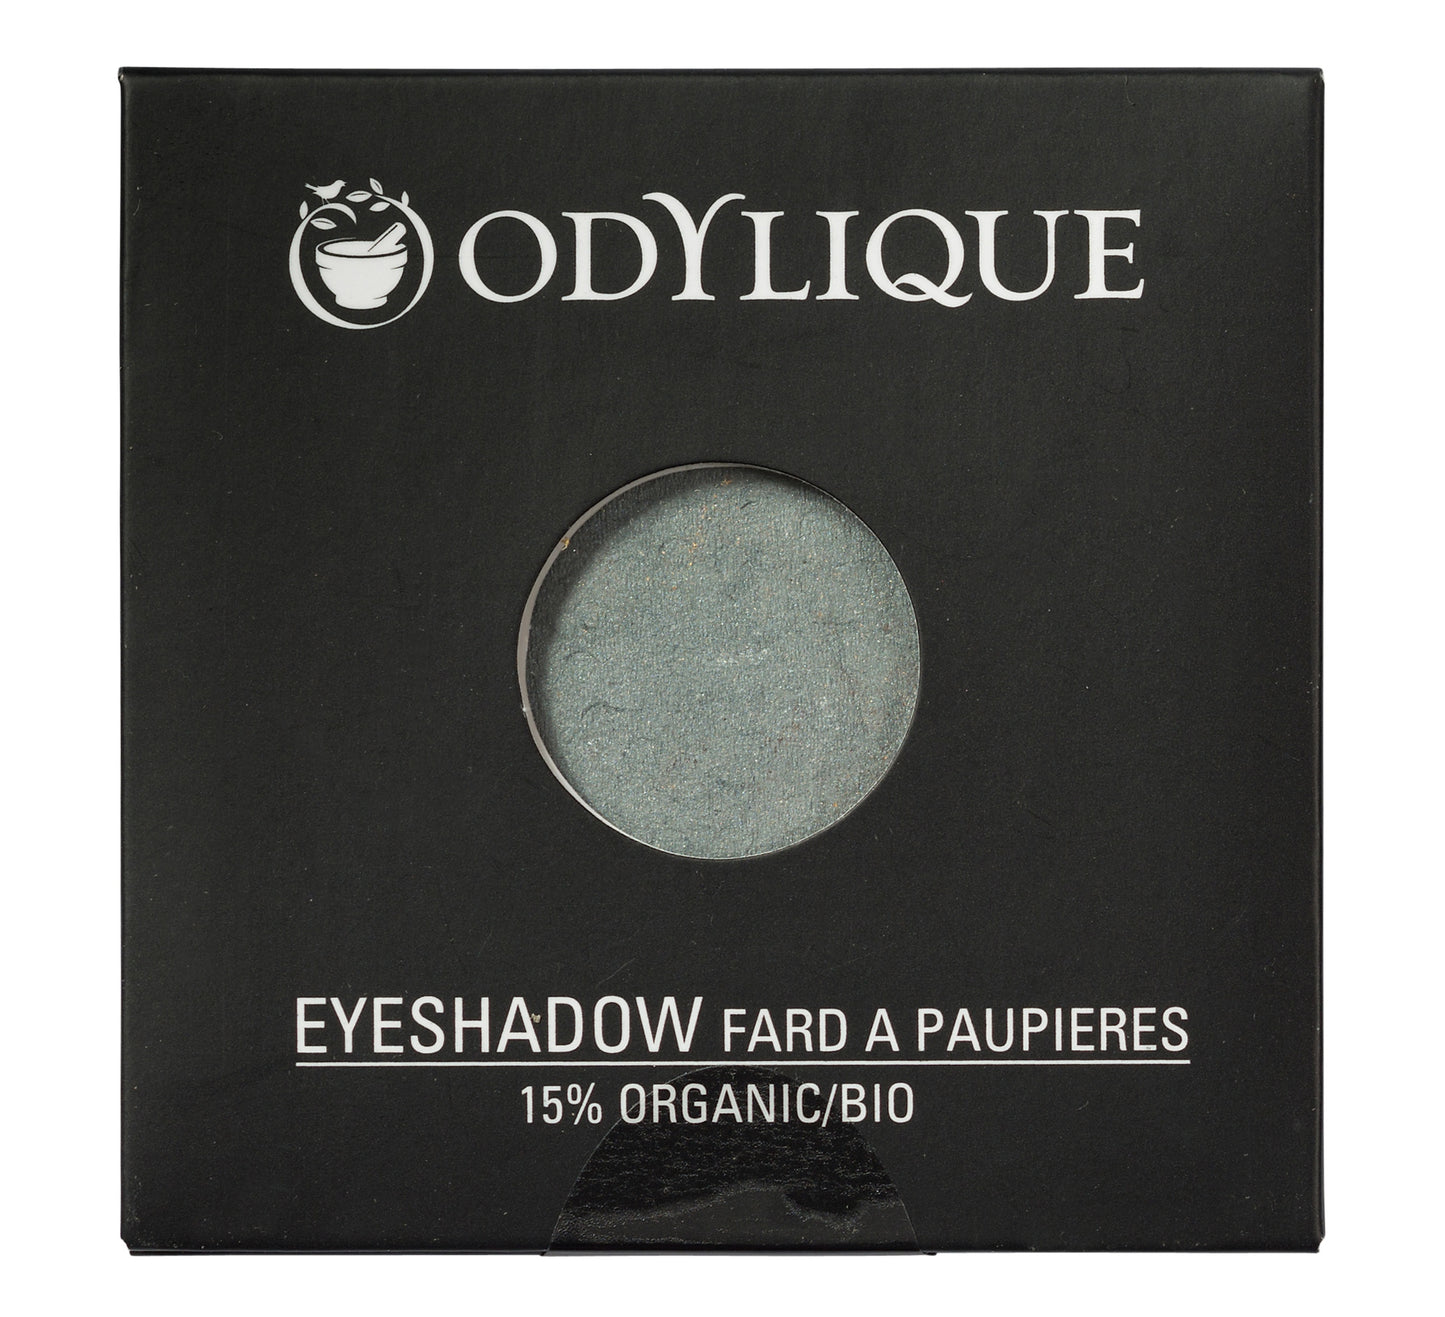 Single pan Odylique organic eyeshadow in shade Lagoon, placed in its black packaging.